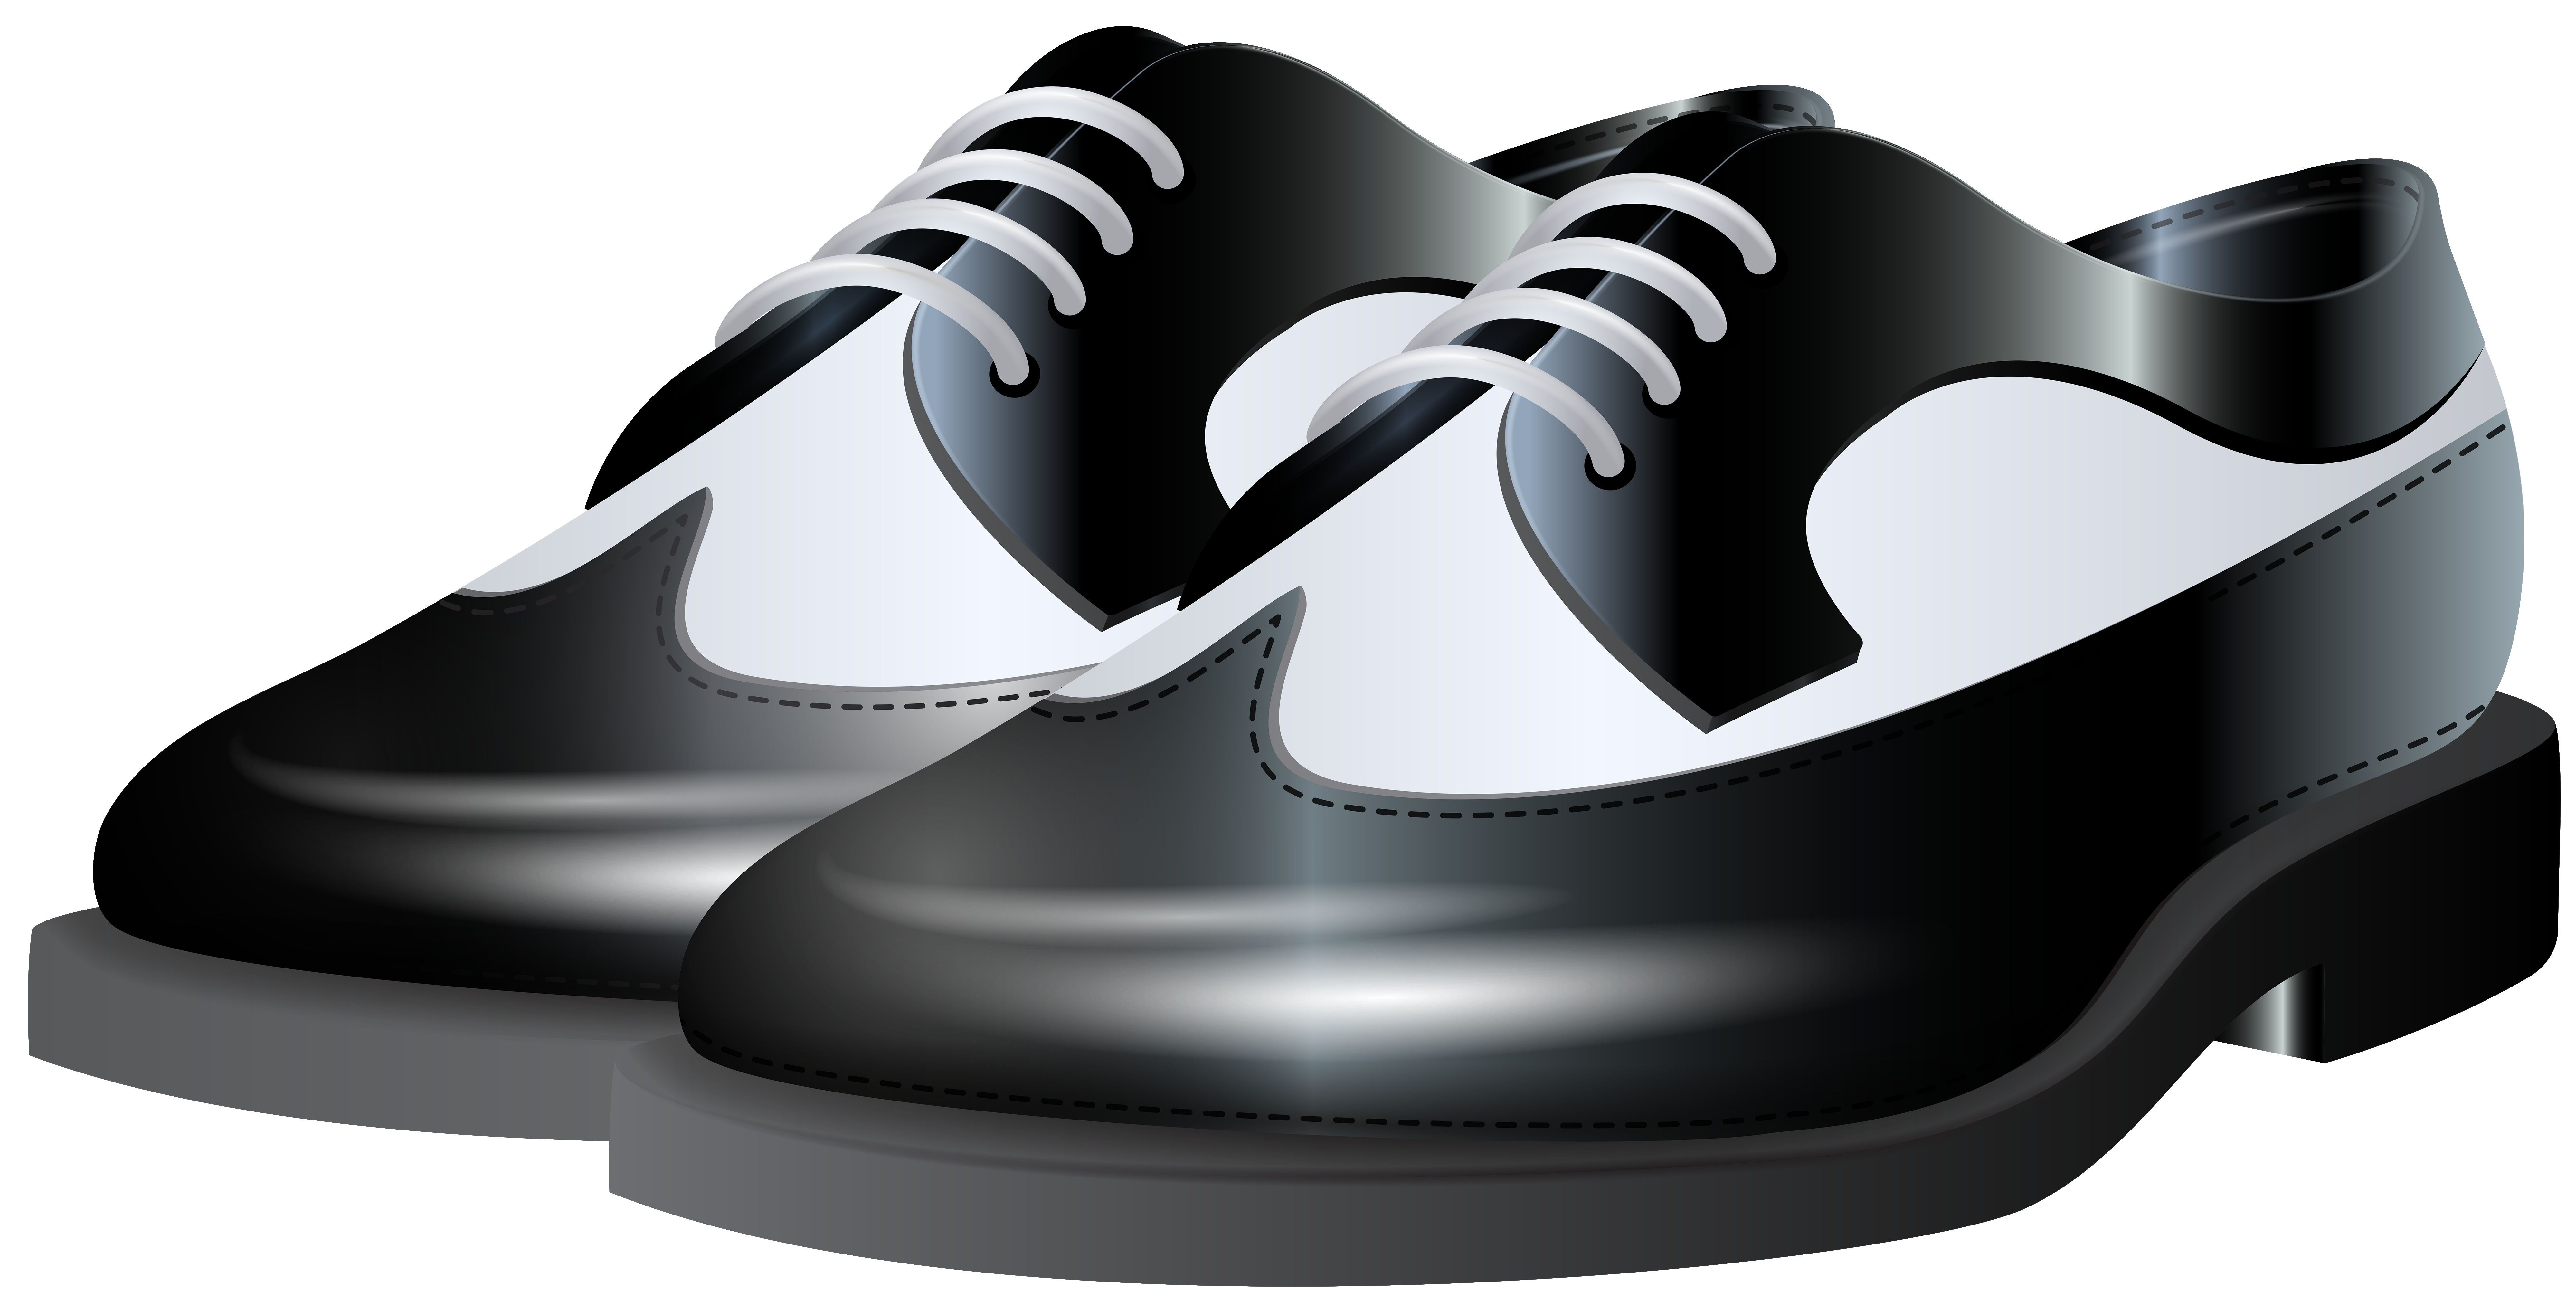 Black and White Shoes NG Clip Art.